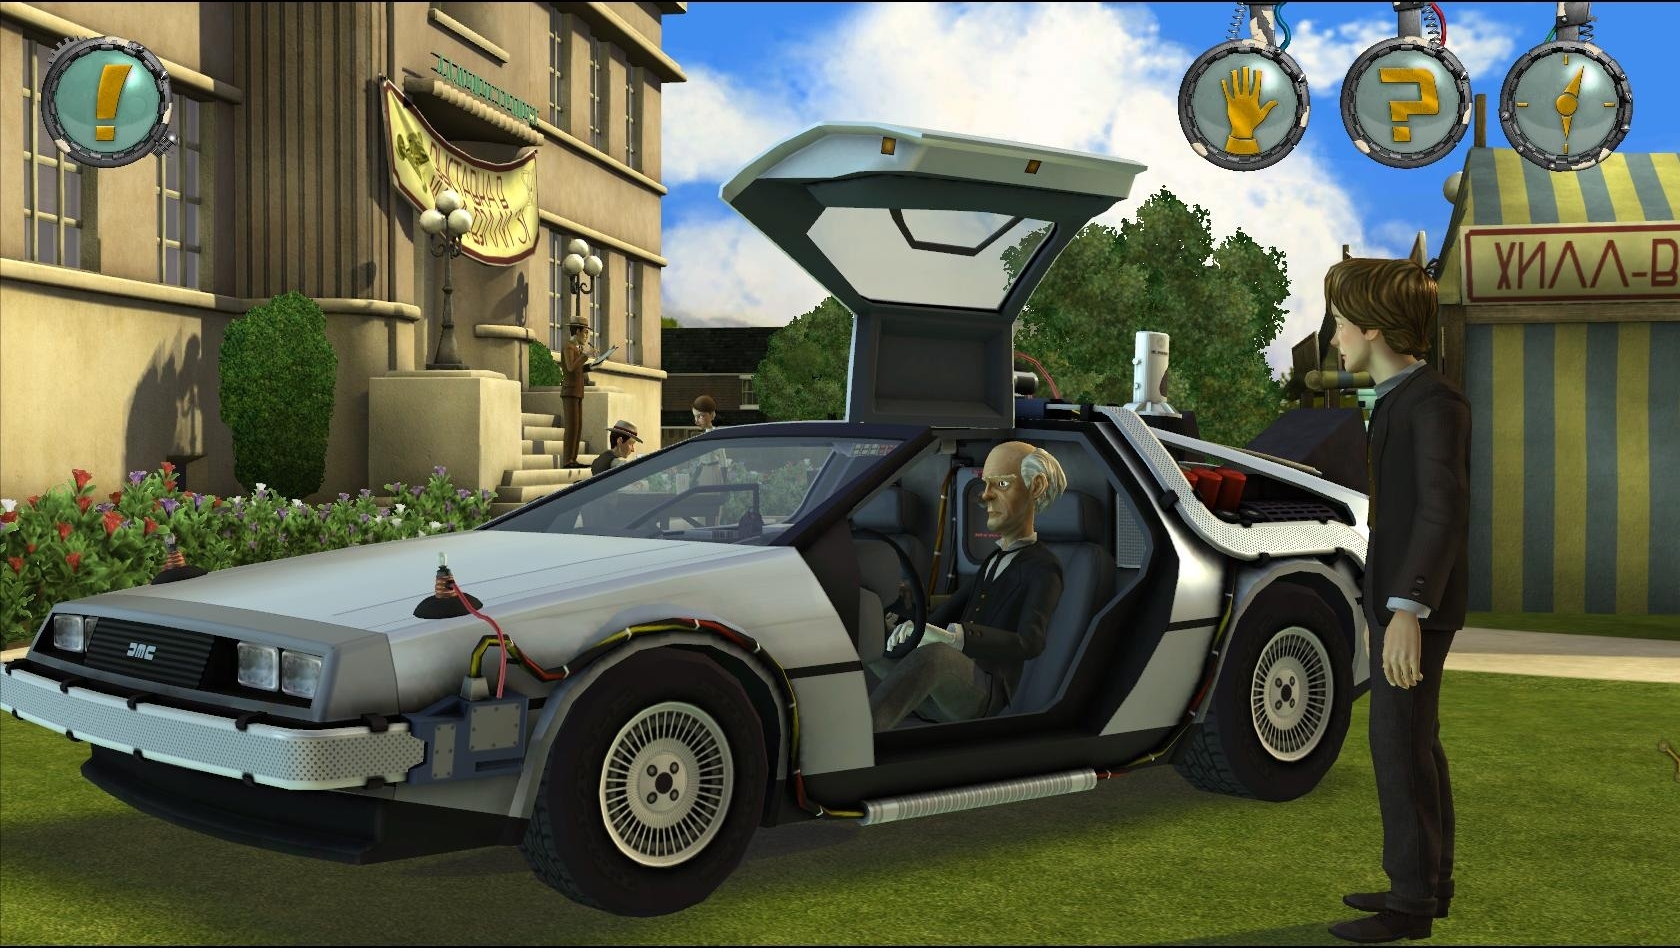 2 30 games. Back to the Future игра. Back to the Future (игра, 1985). Back to the Future the game назад в будущее. Back to the Future 3 игра.